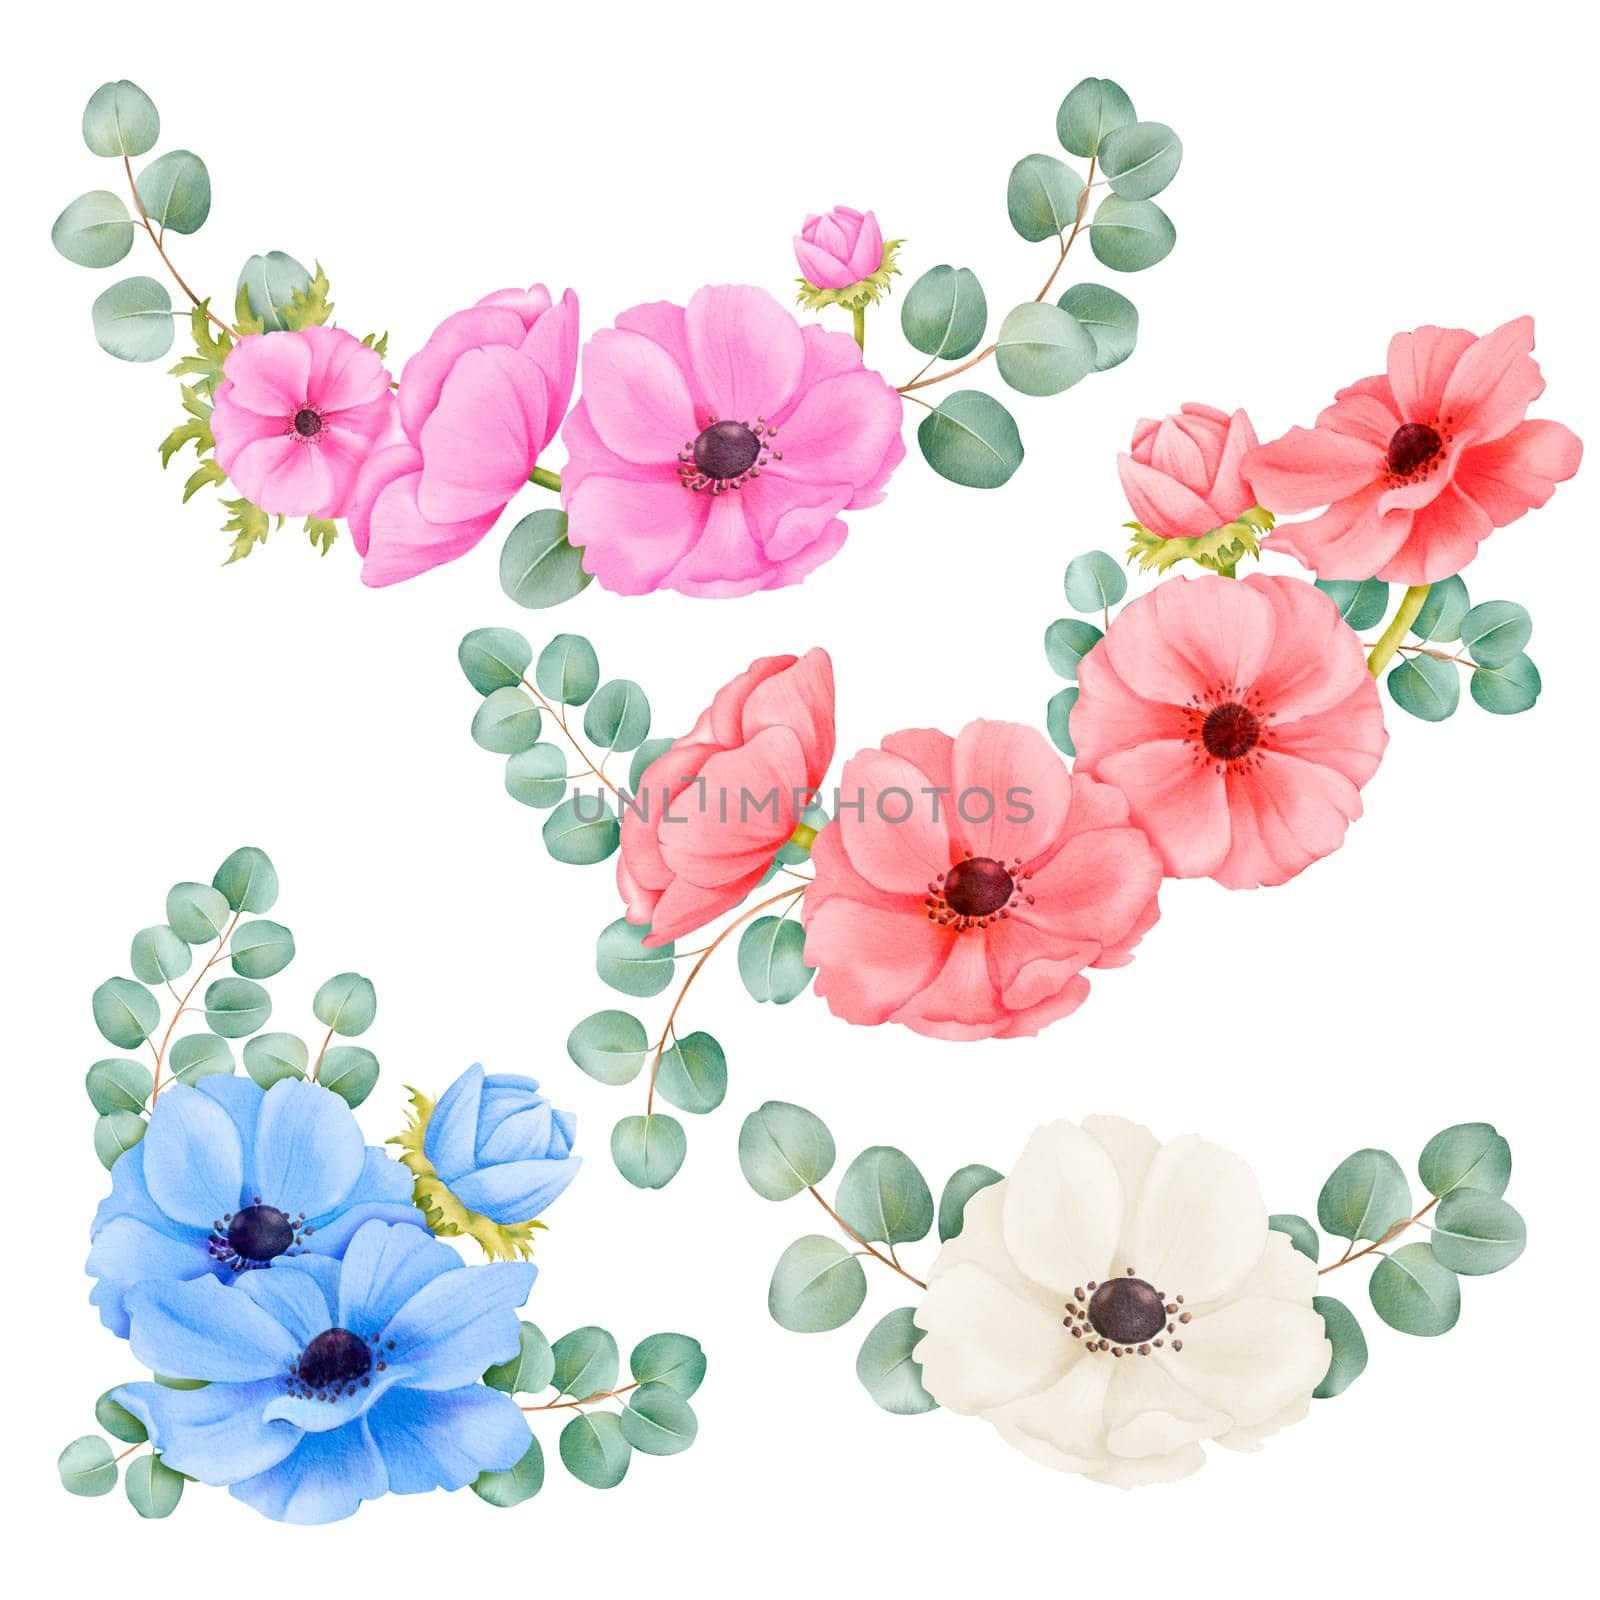 Watercolor collection of floral arrangements featuring anemones in various colors and eucalyptus sprigs. Ideal for wedding invitations, greeting cards, botanical illustrations floral designs by Art_Mari_Ka